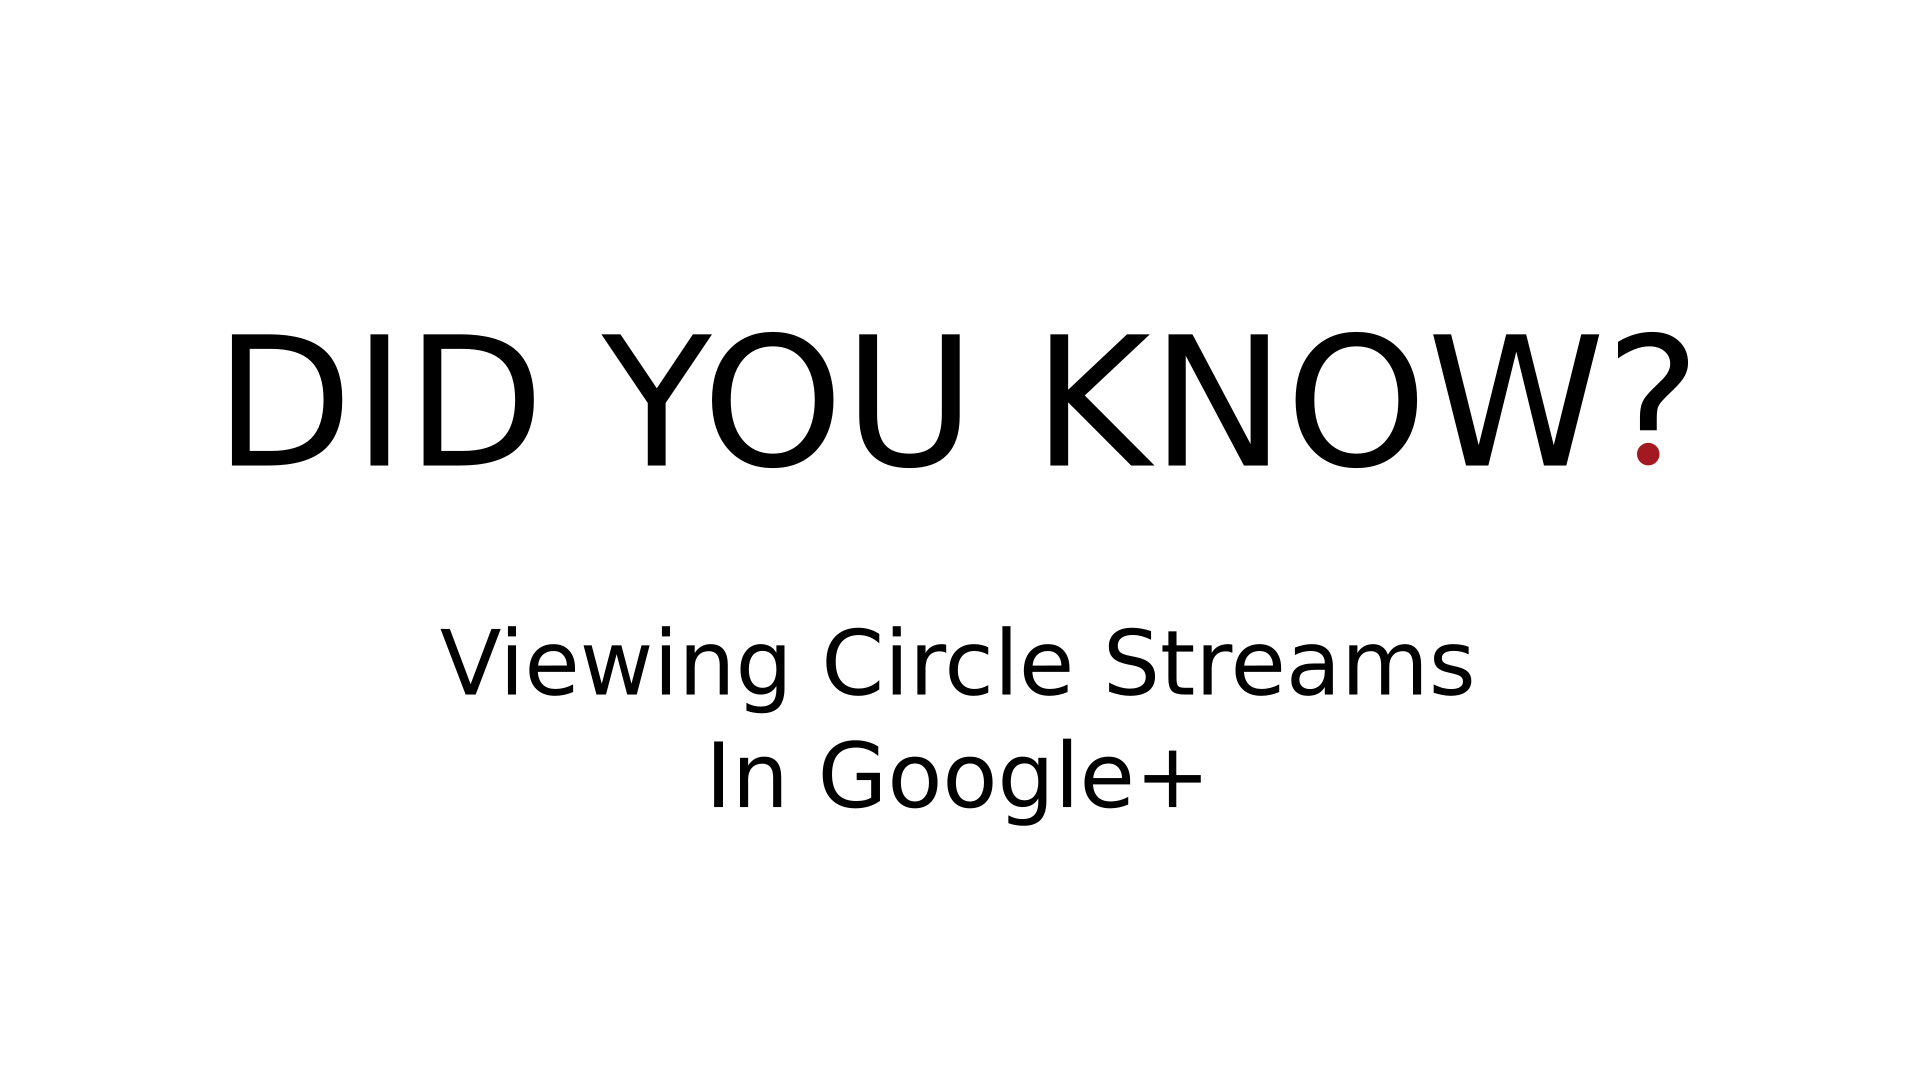 DID YOU KNOW? - Viewing Circle Streams In Google+